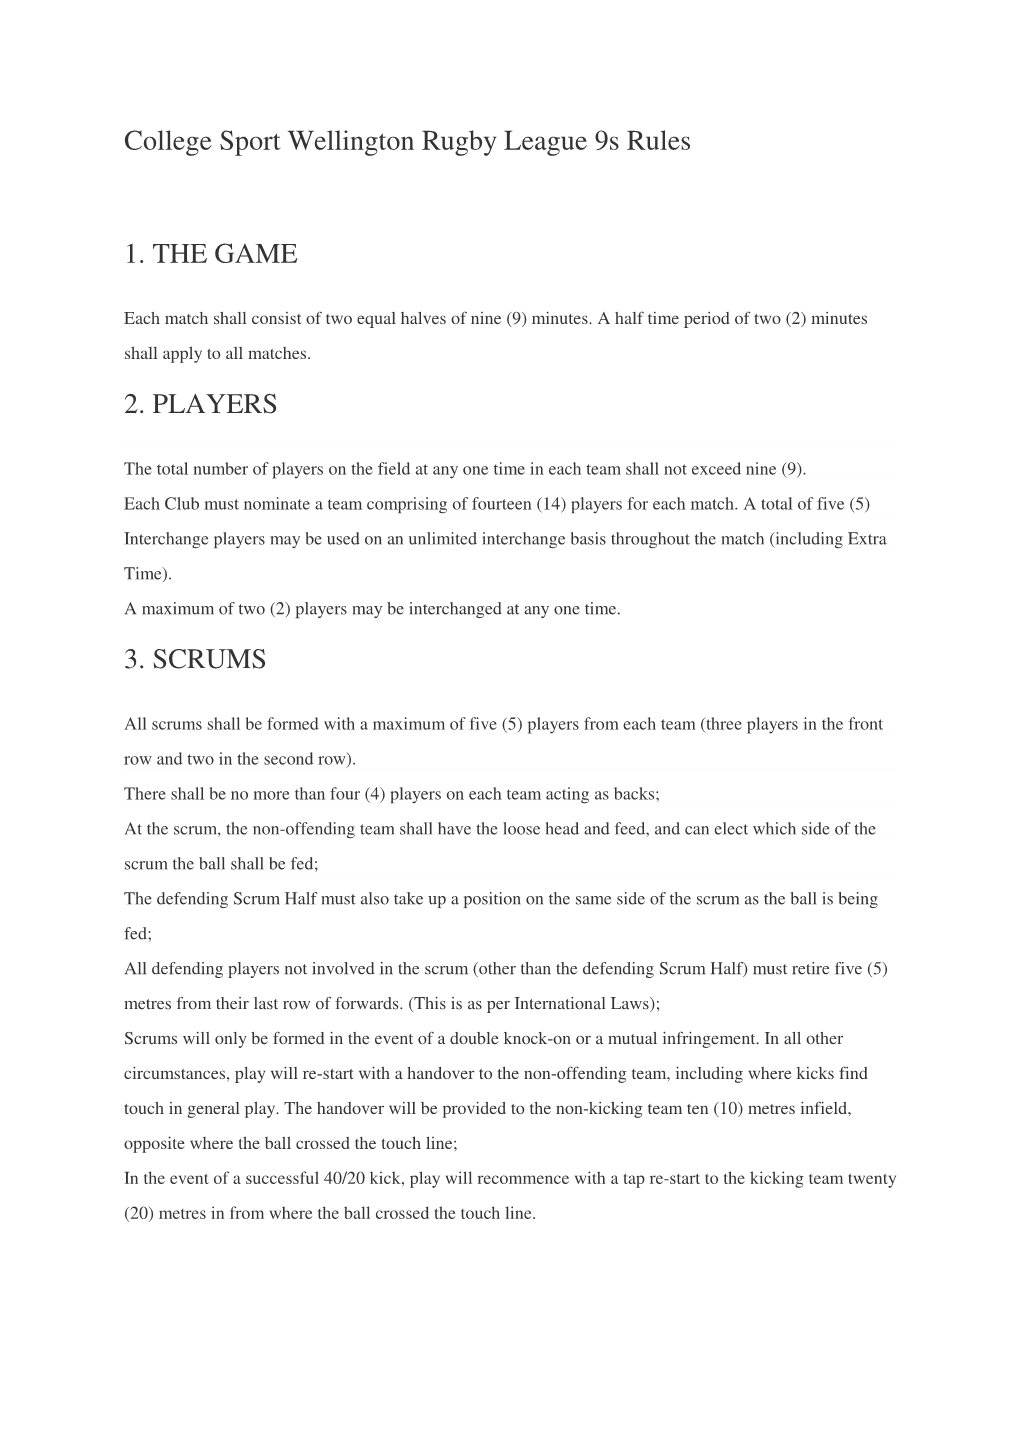 College Sport Wellington Rugby League 9S Rules 1. the GAME